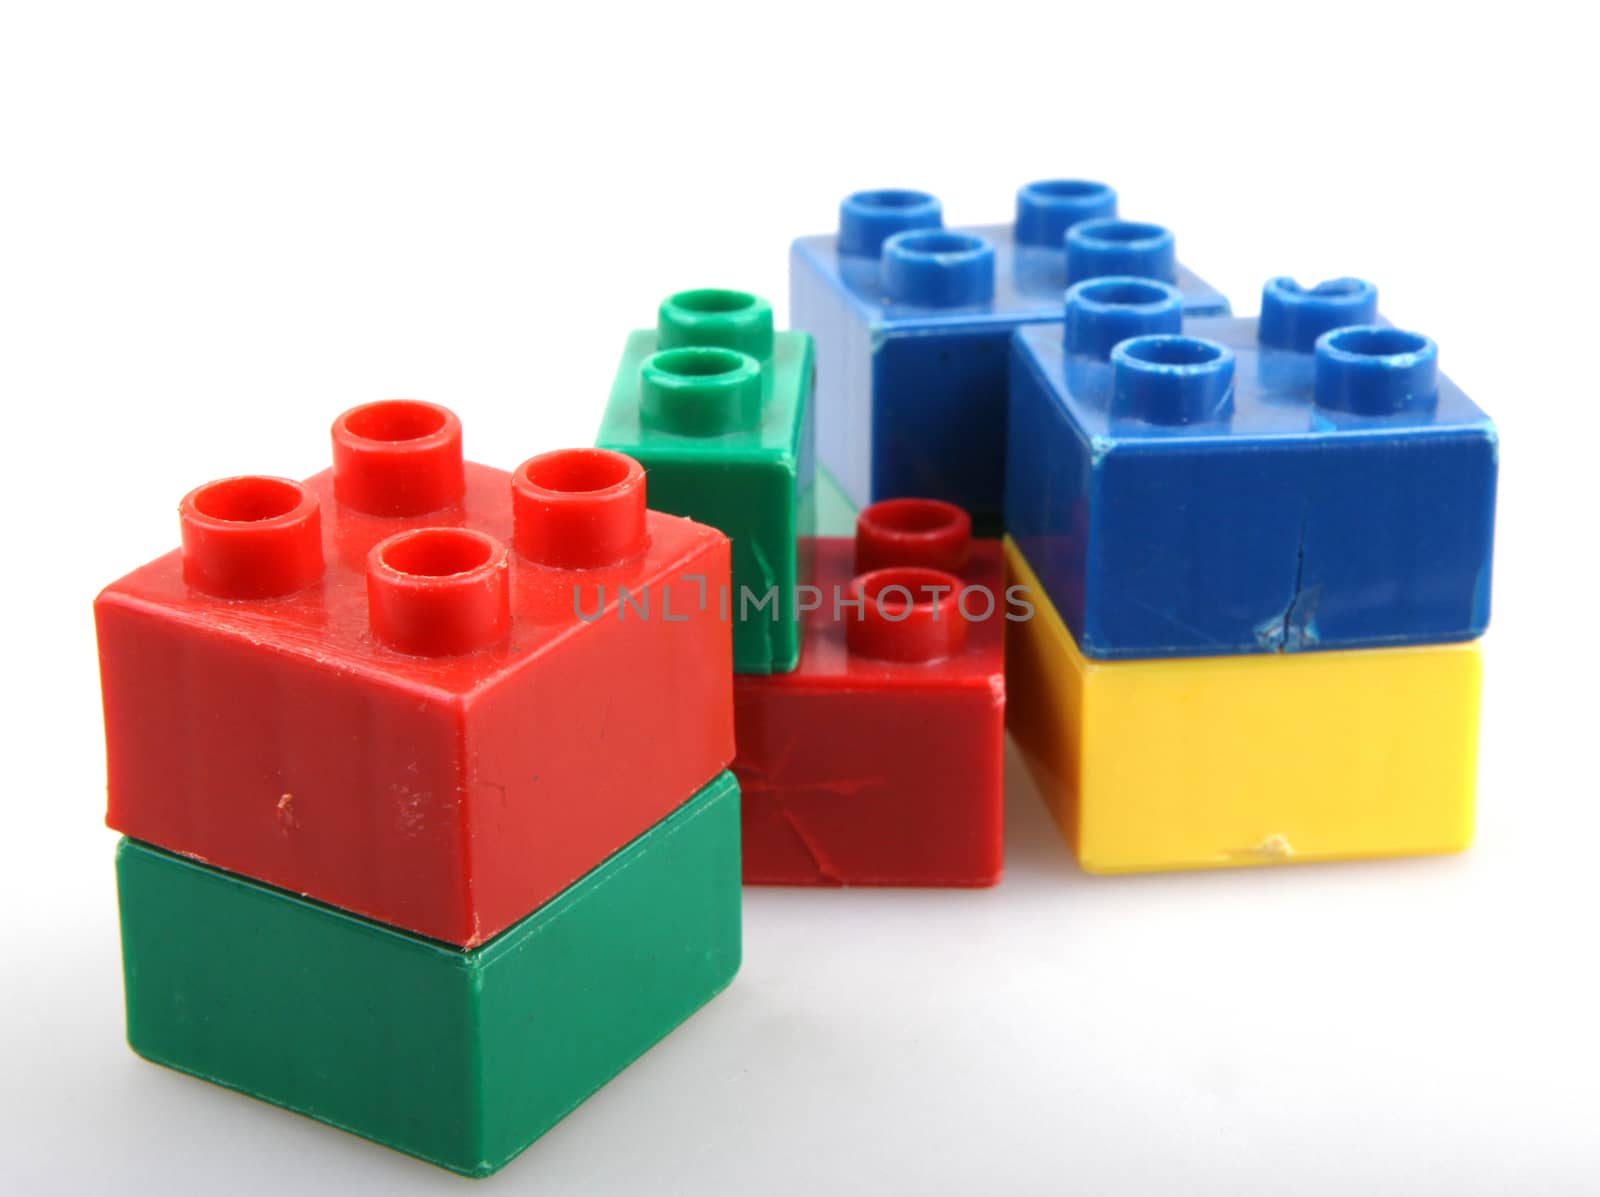 Building Blocks Isolated On White